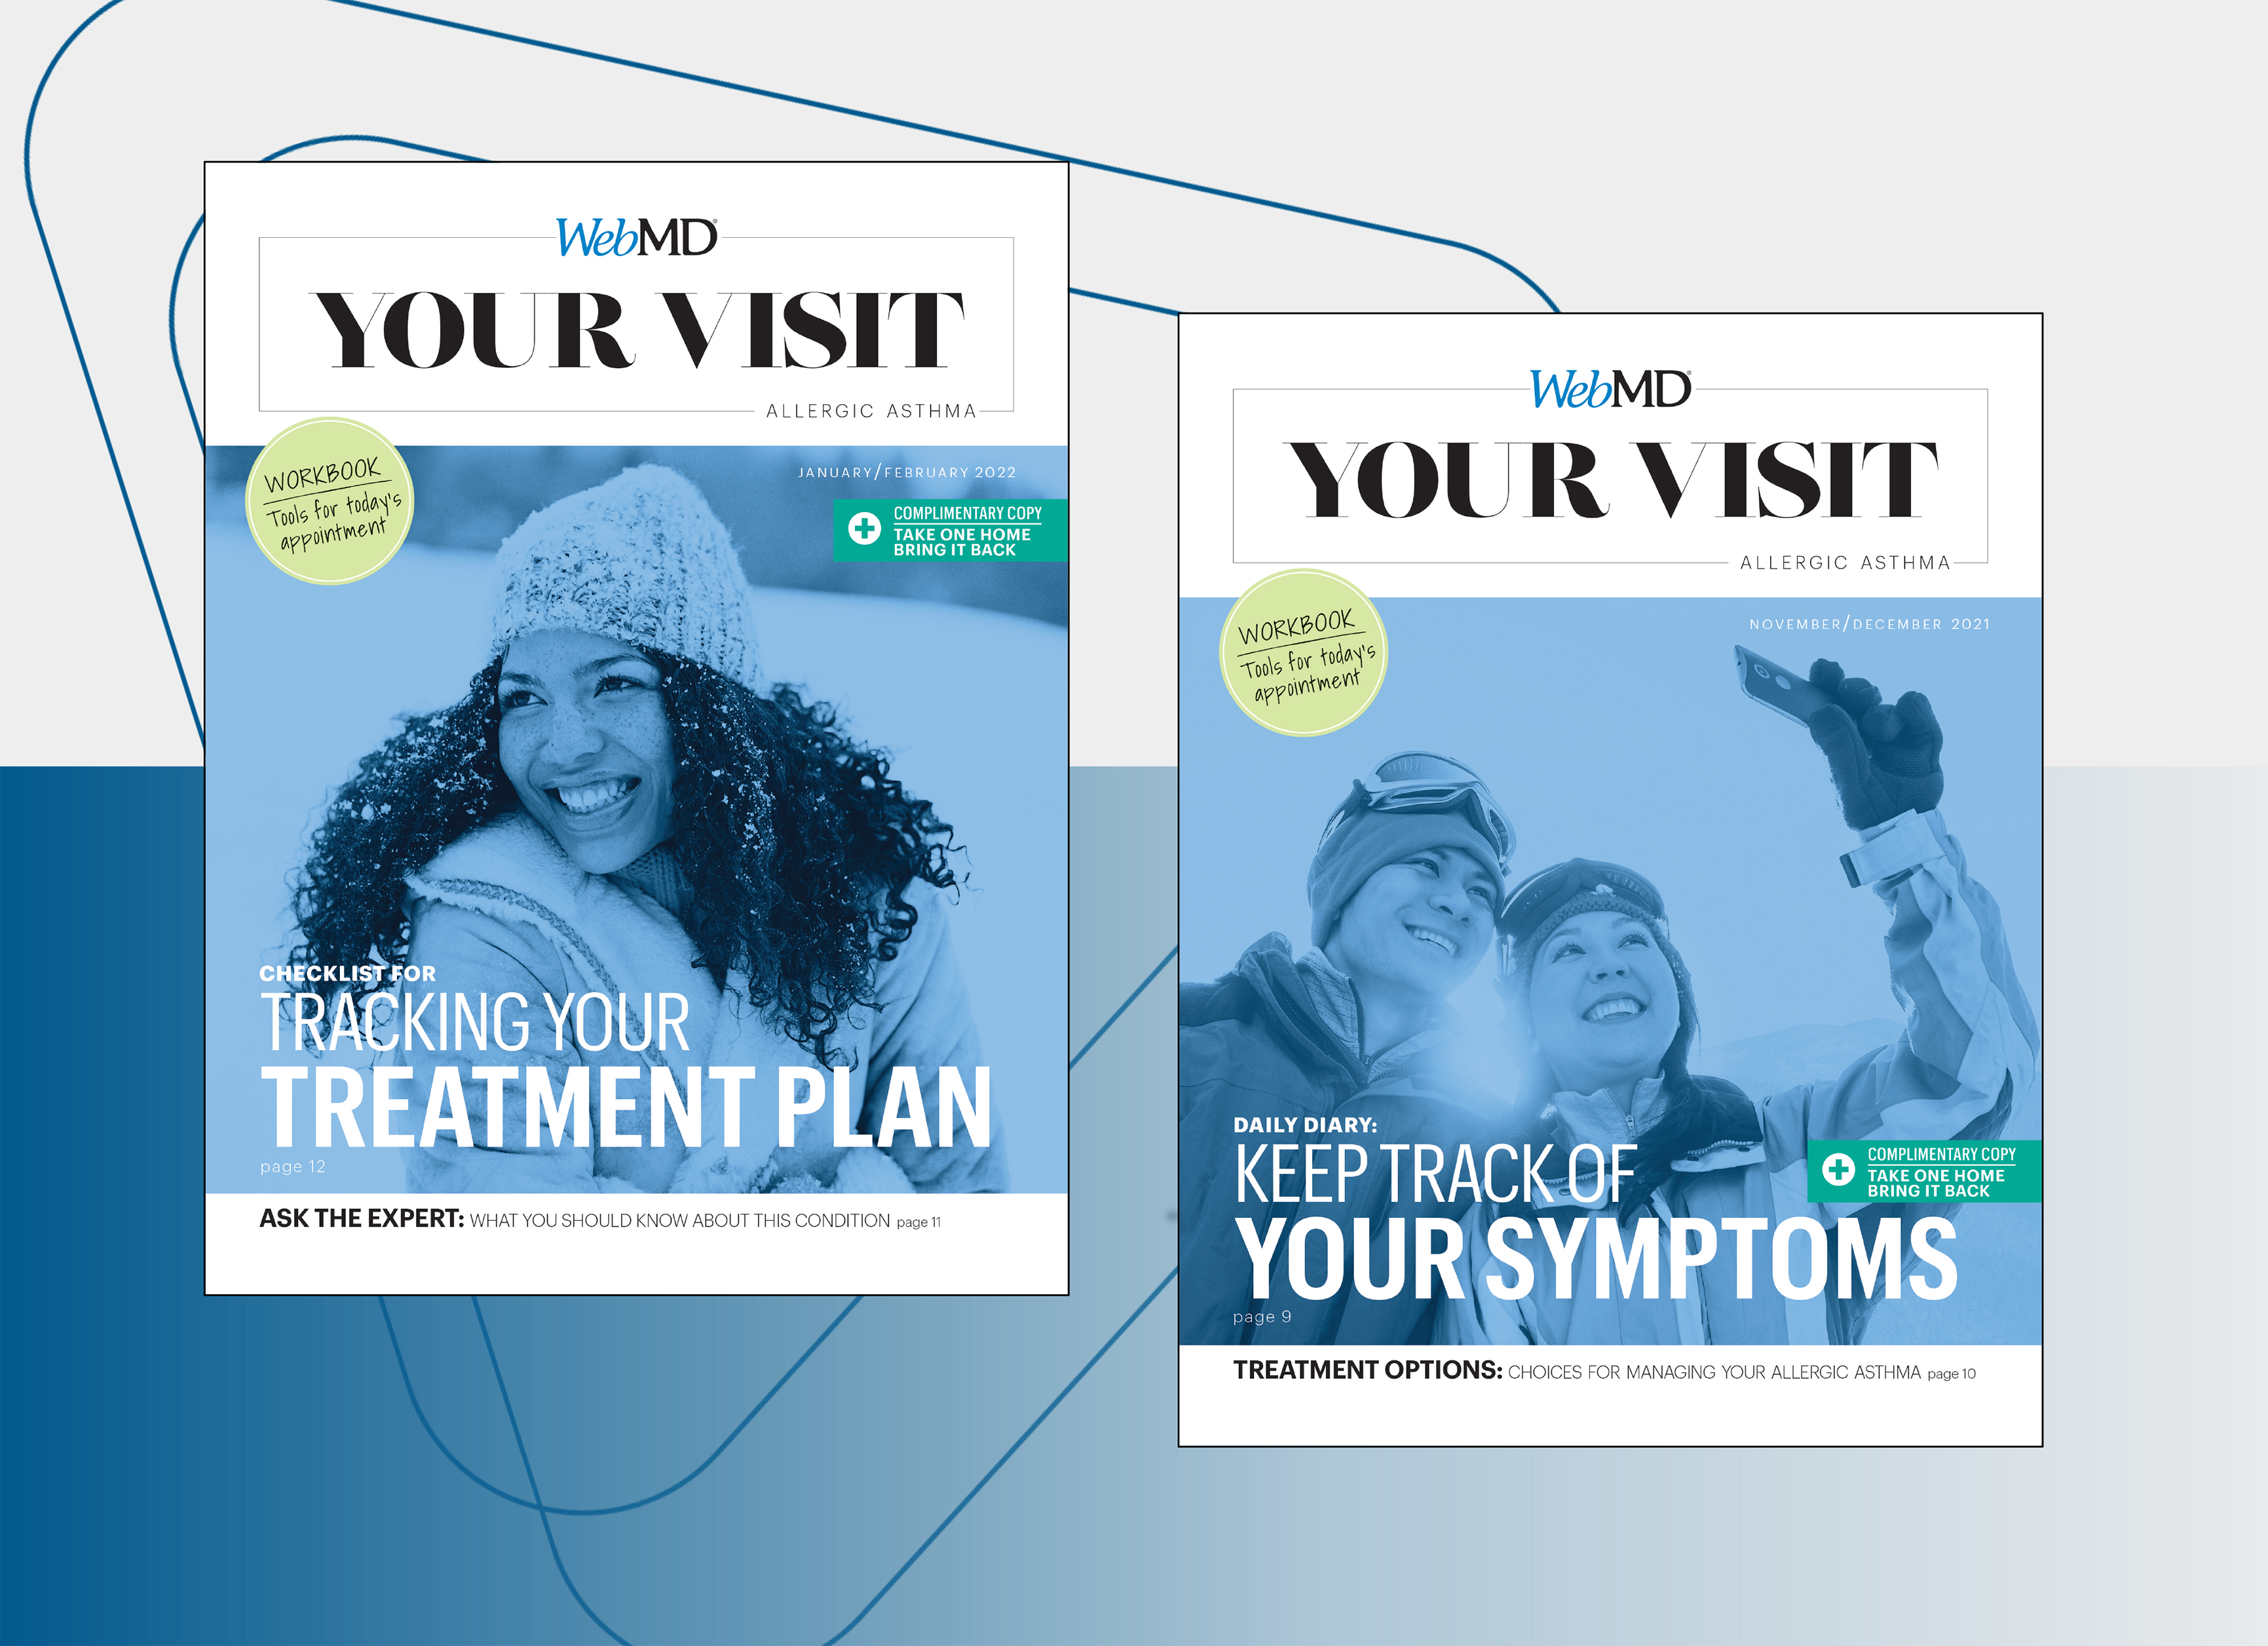 “Your Visit” WorkbooksA print, digital, and mobile-optimized workbook designed to engage the patient in preparation for thoughtful doctor interaction.